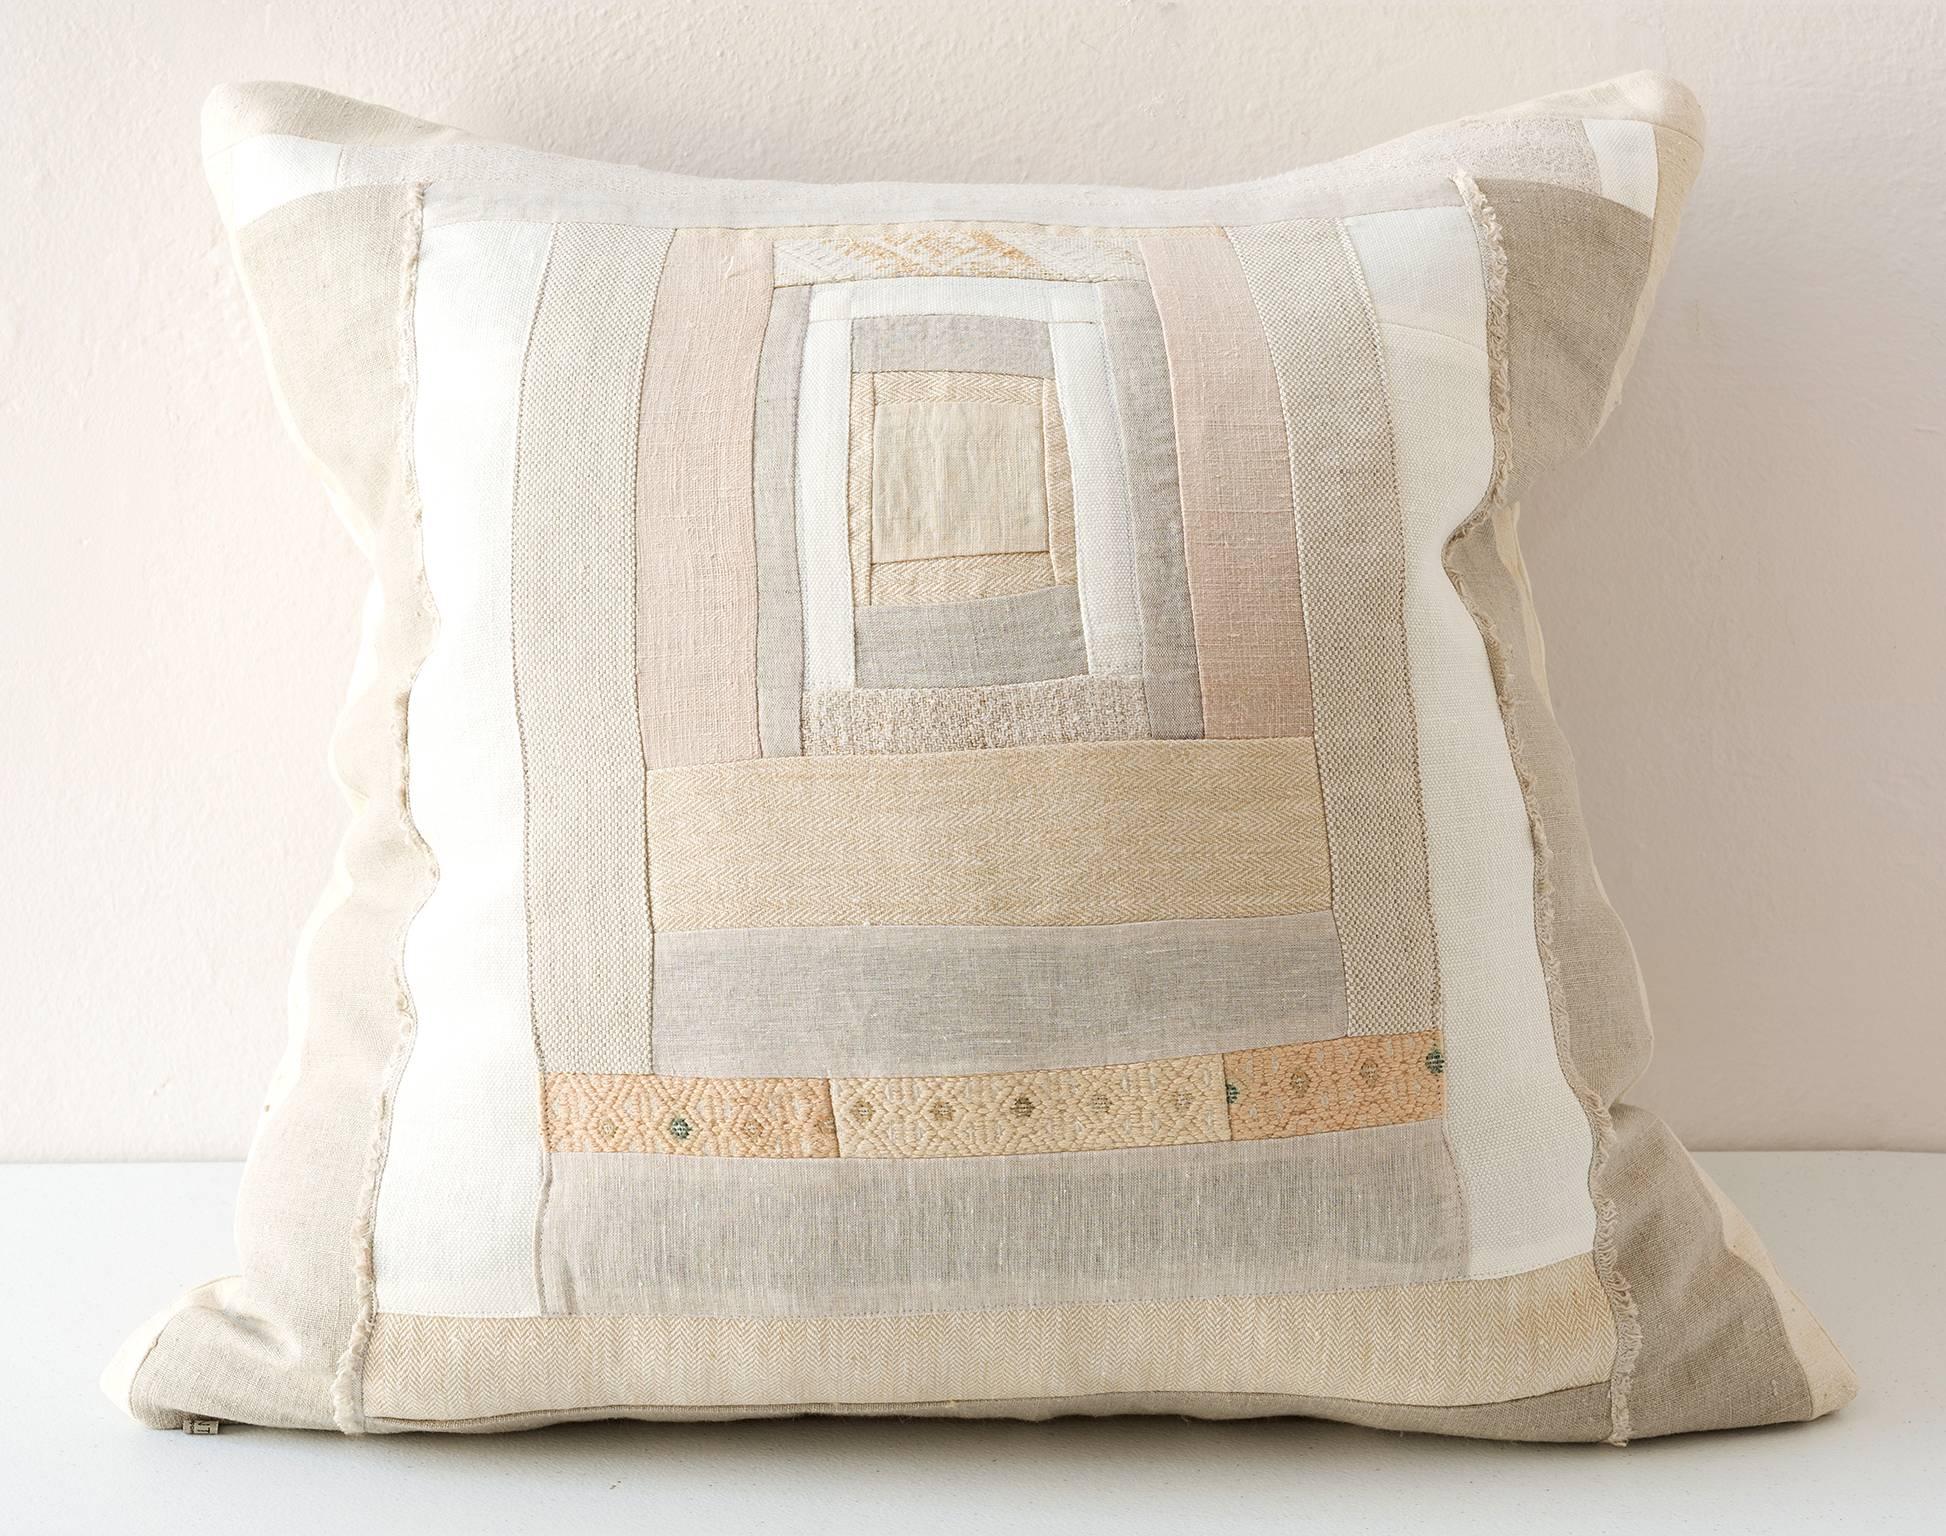 Two tonal colored cushions. A piecework composition inspired by San Geremia church in Venice. Vintage and contemporary linens and cottons: Europe, Japan, China. 

Linen on reverse - see image
75/25 goose feather and down inserts.
Concealed